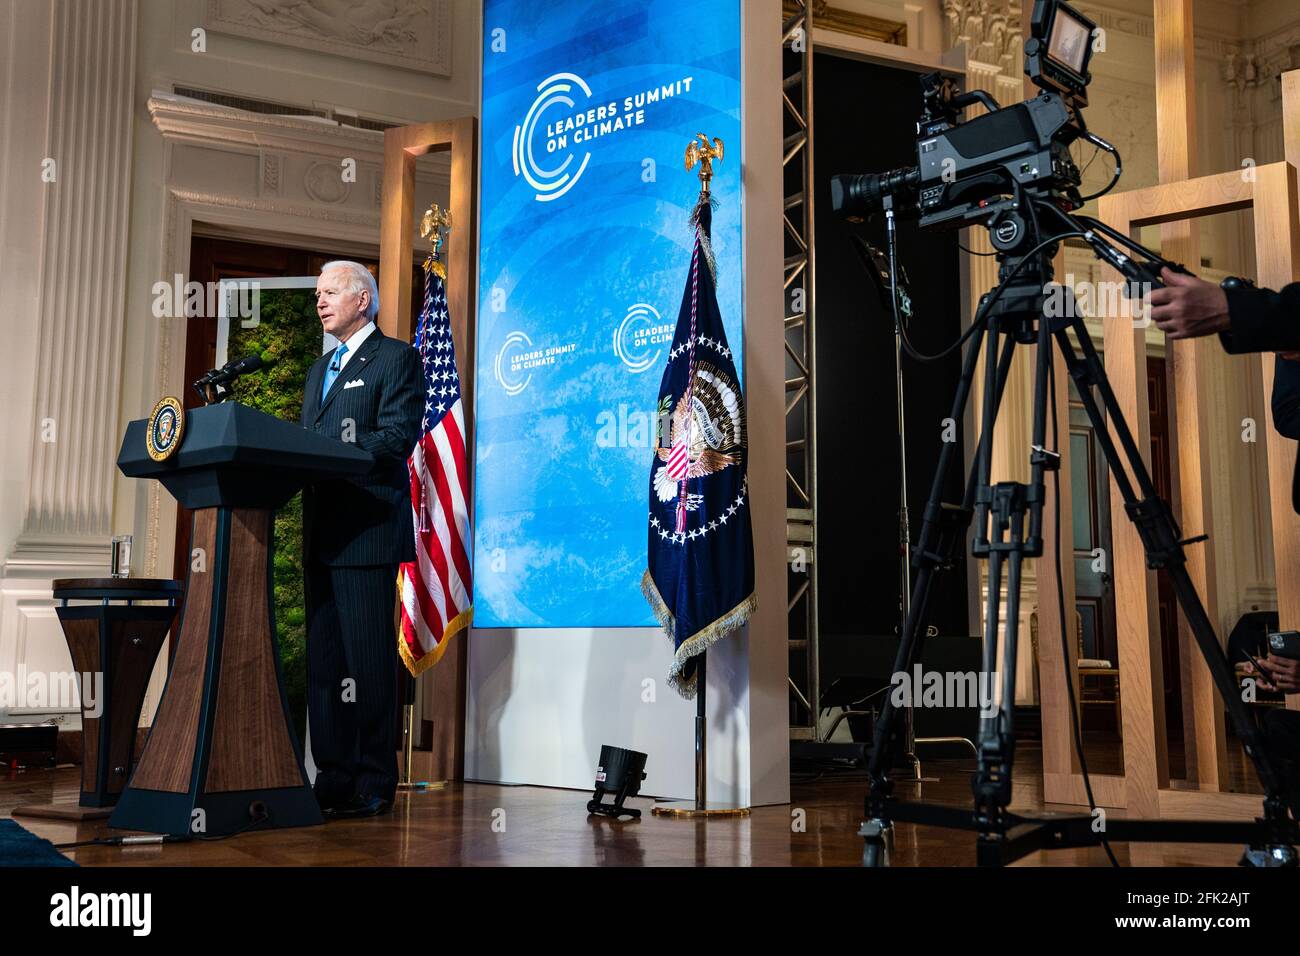 Washington, United States Of America. 23rd Apr, 2021. United States  President Joe Biden delivers remarks during “Session 5: The Economic  Opportunities of Climate Action” of the virtual Leaders Summit on Climate,  in